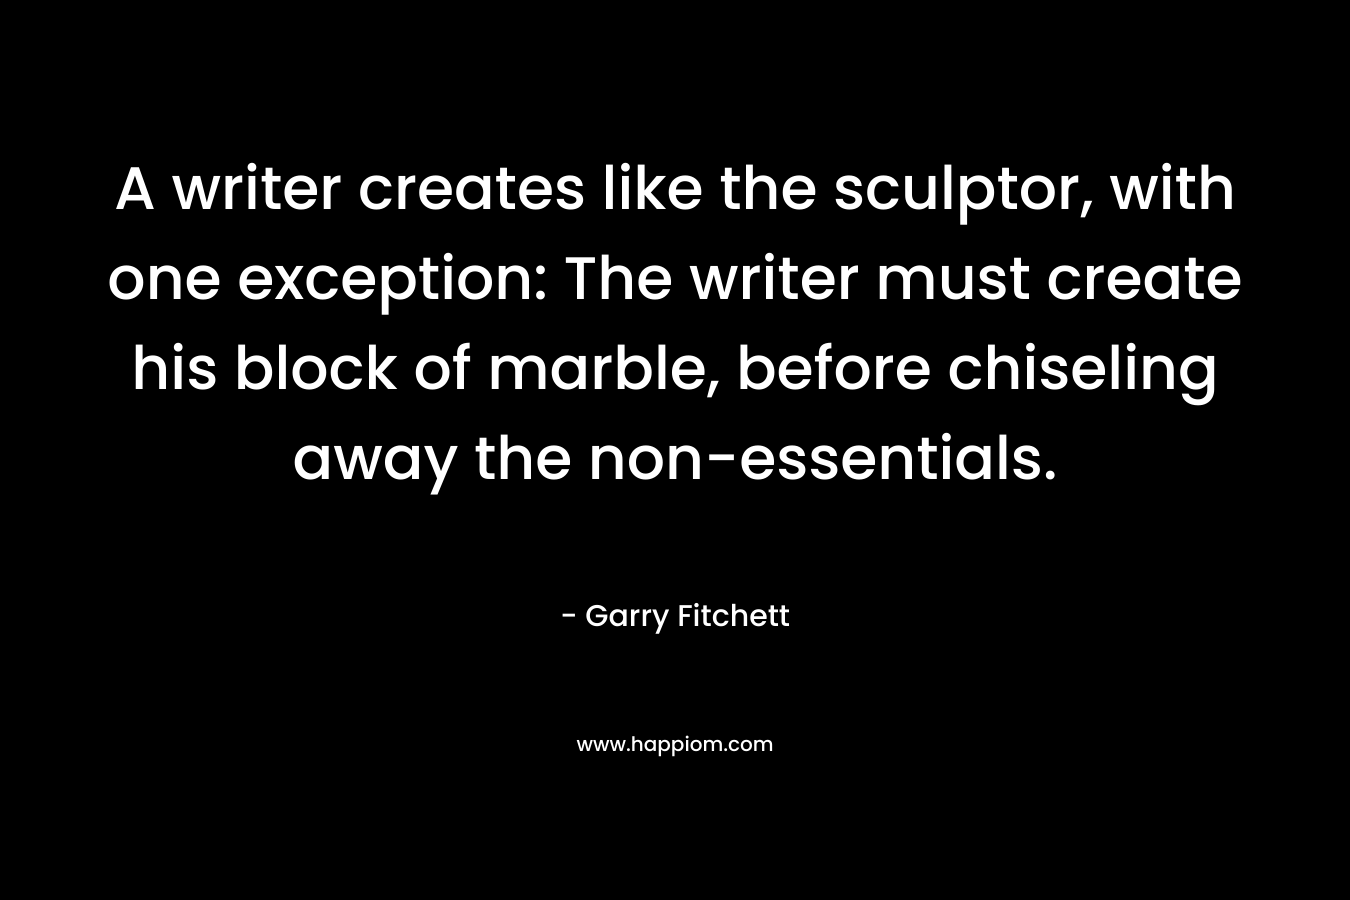 A writer creates like the sculptor, with one exception: The writer must create his block of marble, before chiseling away the non-essentials.